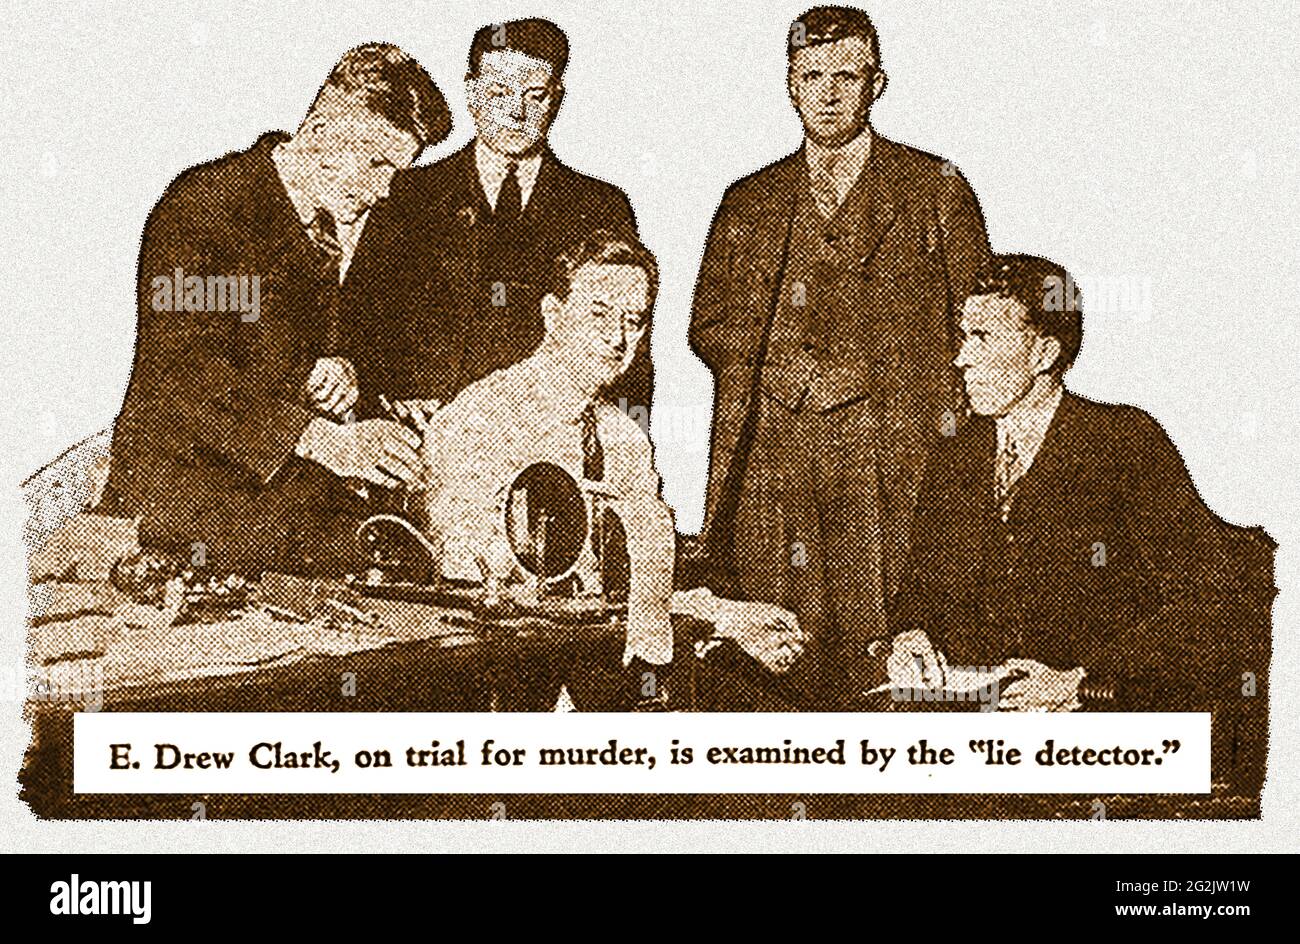 An old newspaper cutting showing the American suspected  murderer E. Drew Clark being interviewed with the aid of a lie detector. One of  the earliest lie detectors  was invented by James Mackenzie in 1902. In 1921 John Augustus Larson invented a mor reliable machine which was improved upon by Leonard Keeler  in the 1930s .It became known as the “Compact Keeler Polygraph“. The basic design is still used today. Legal & medical bodies argue about its accuracy.  The Stoelting Polyscribe the worlds first all electronic polygraph arrived in 1988 followed by the computerised Polygraph in 1992. Stock Photo